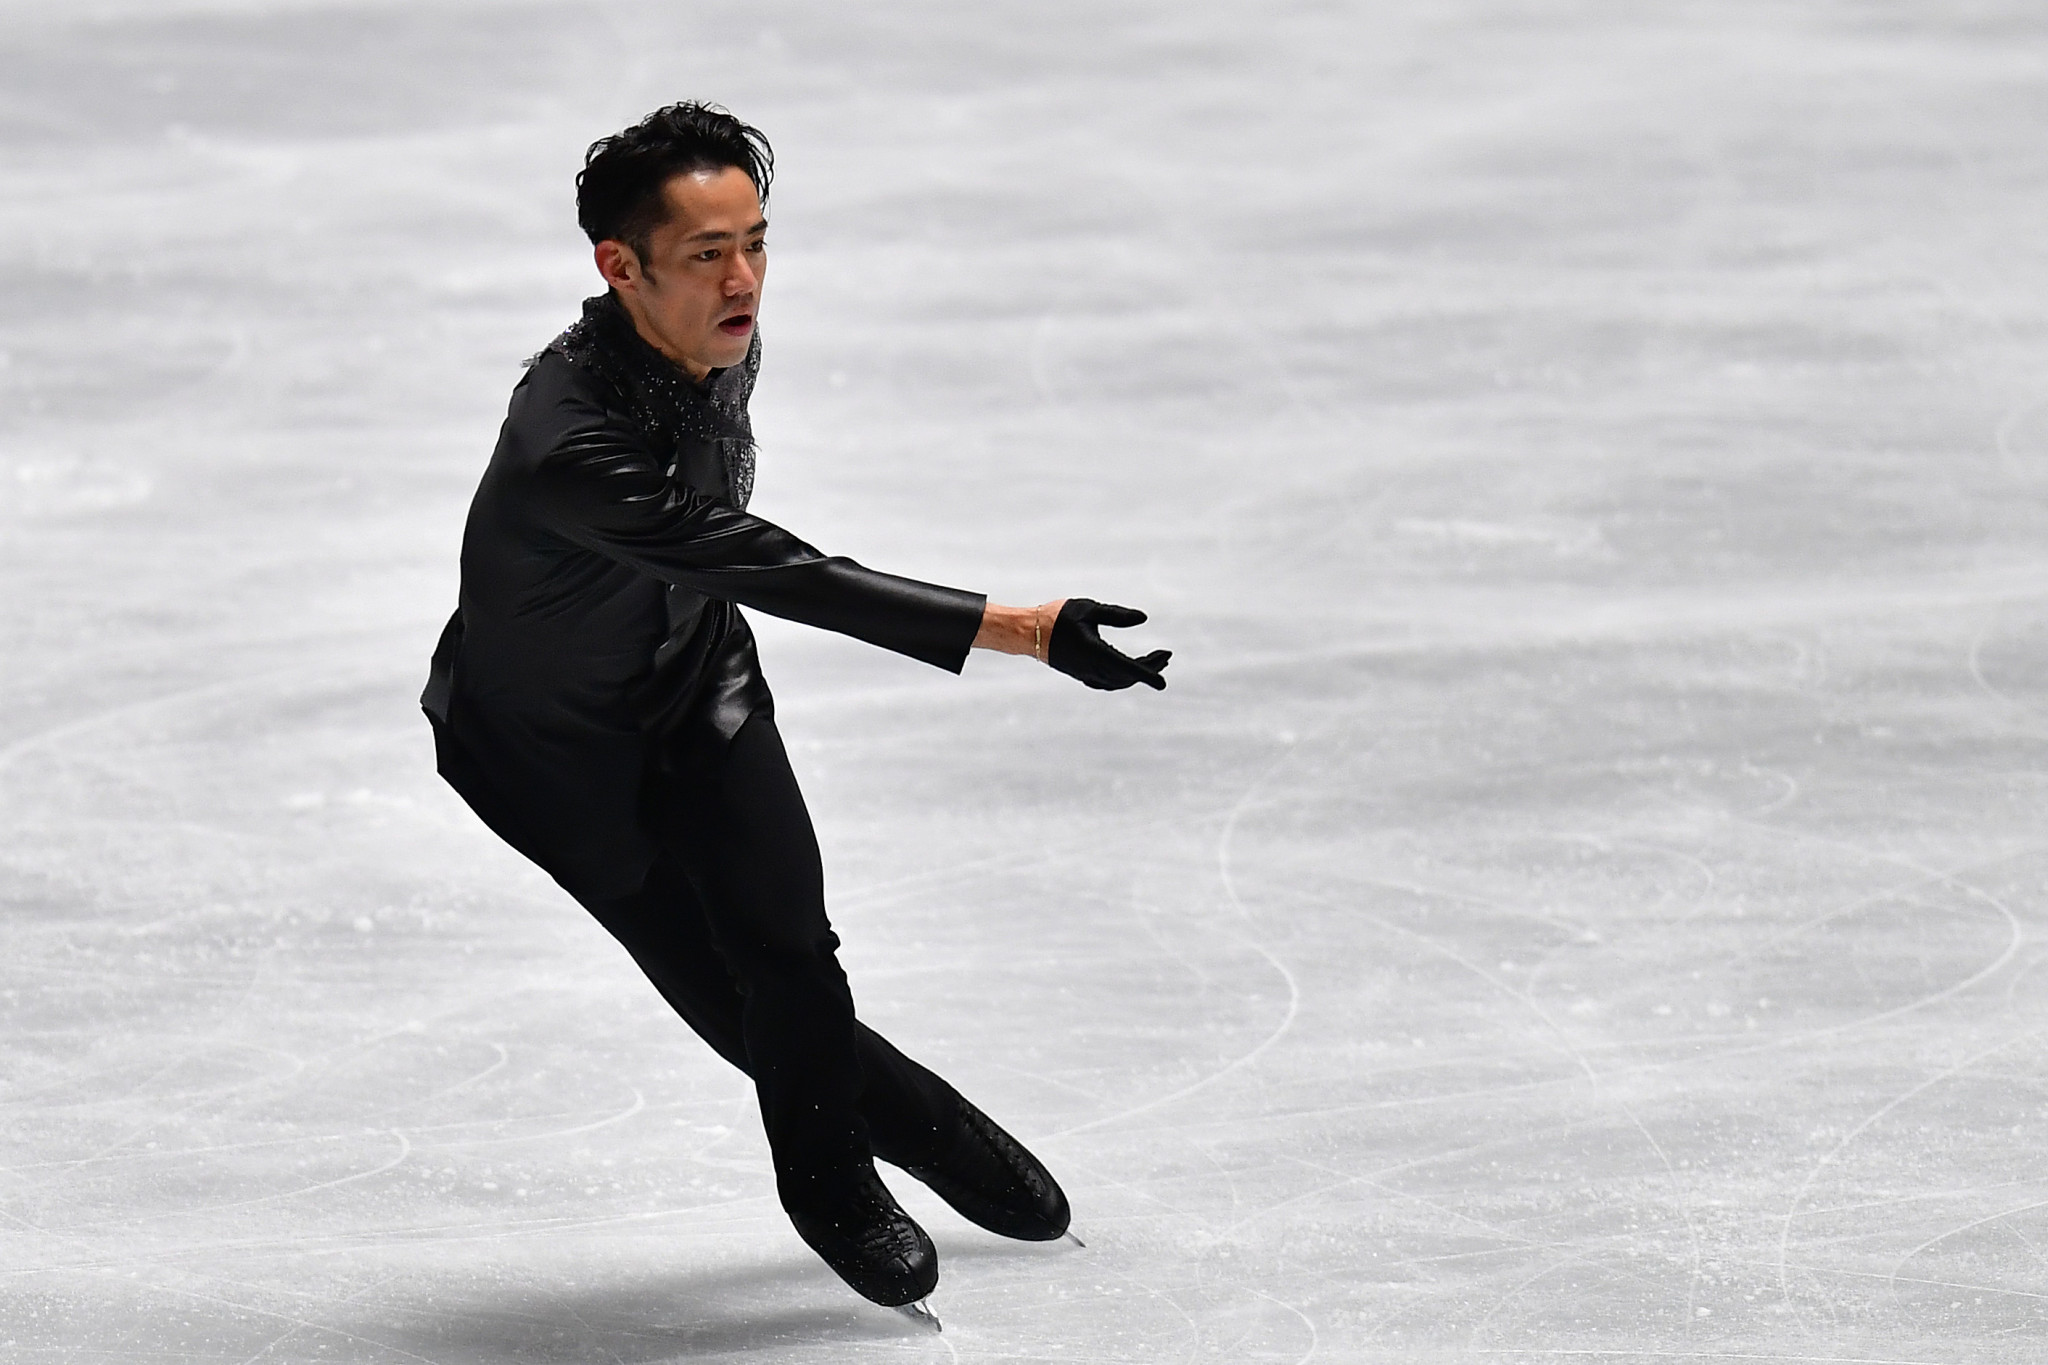 Daisuke Takahashi will carry the Torch in Okayama prefecture ©Getty Images